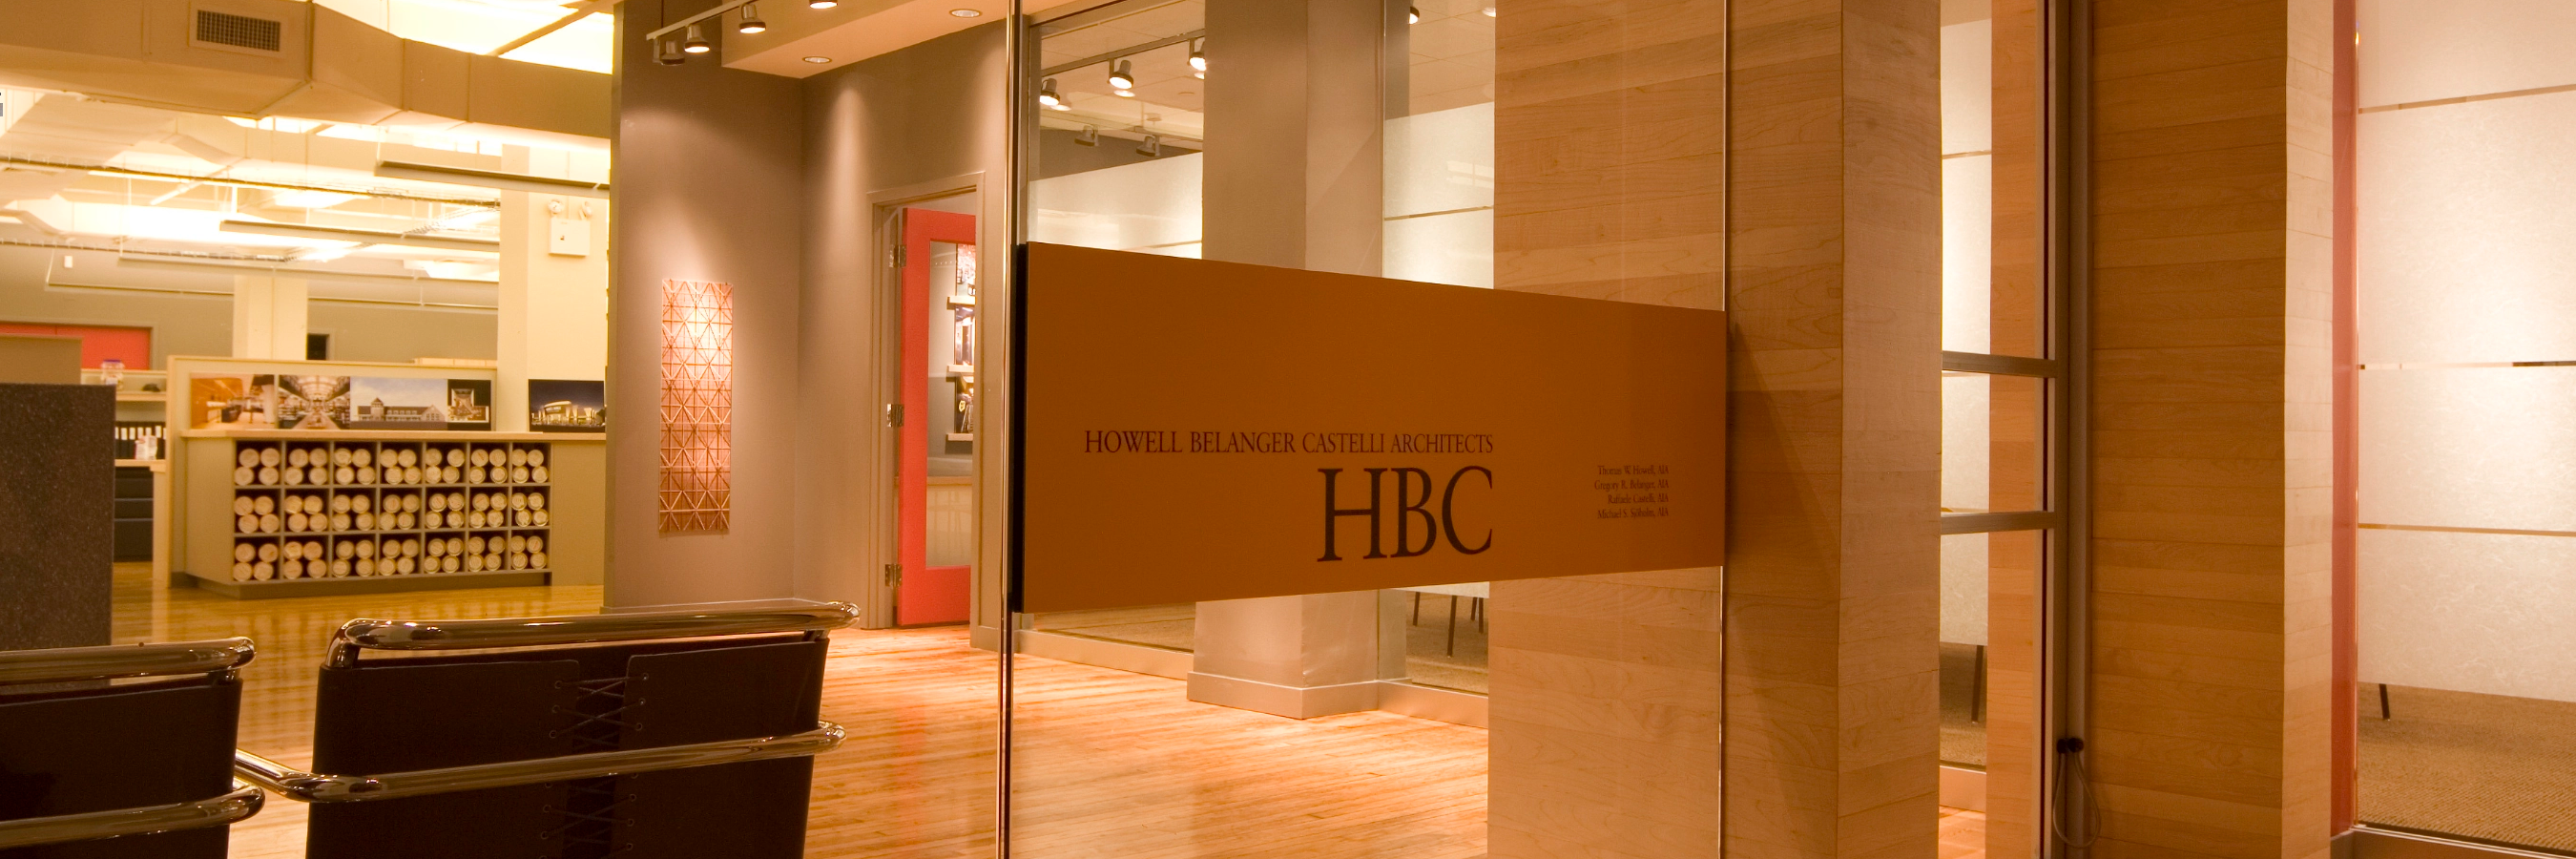 Contact Howell Belanger Castelli Architects